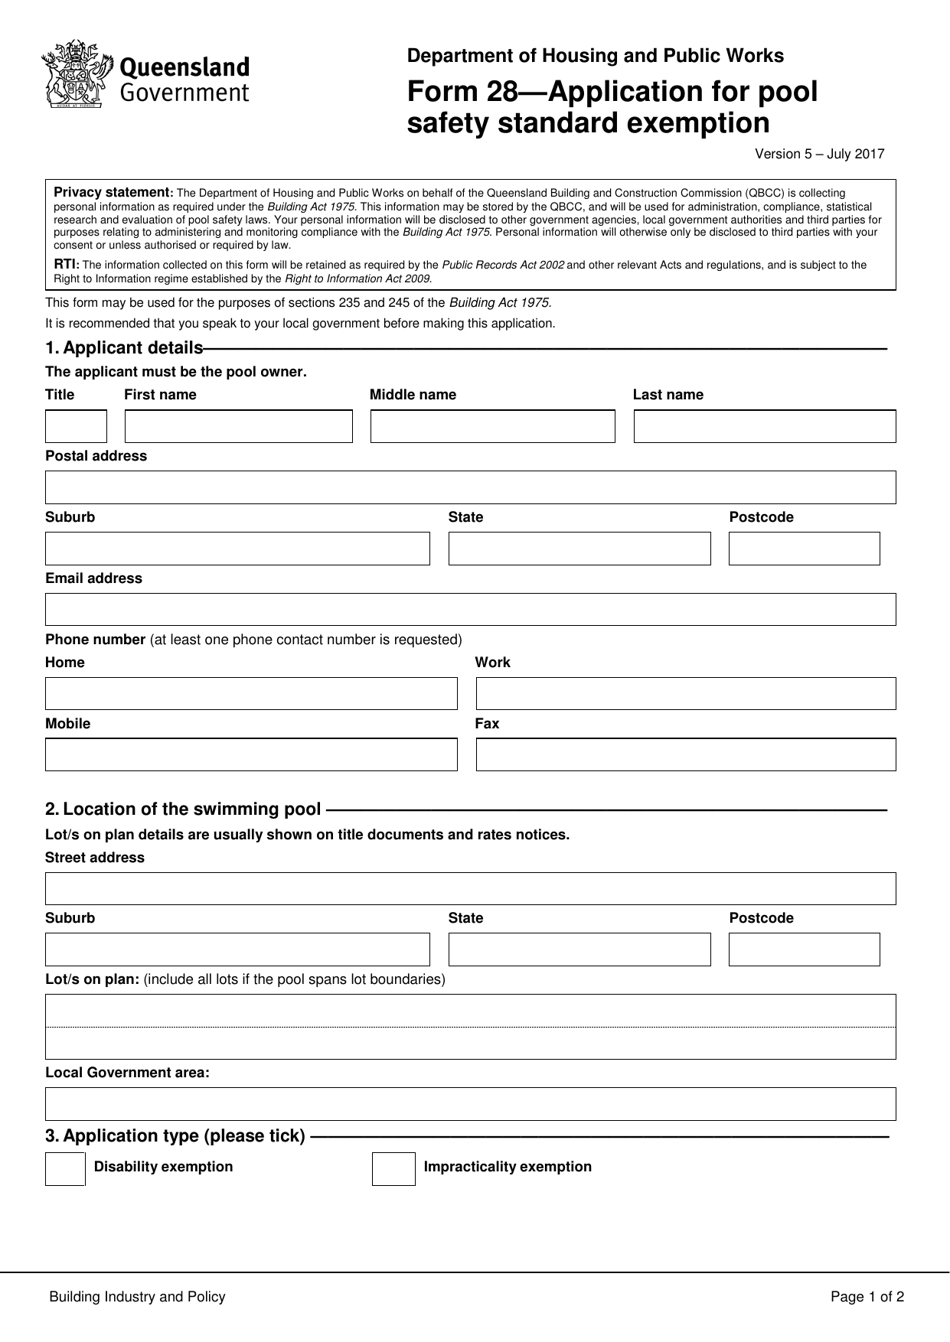 Form 28 Application for Pool Safety Standard Exemption - Queensland, Australia, Page 1